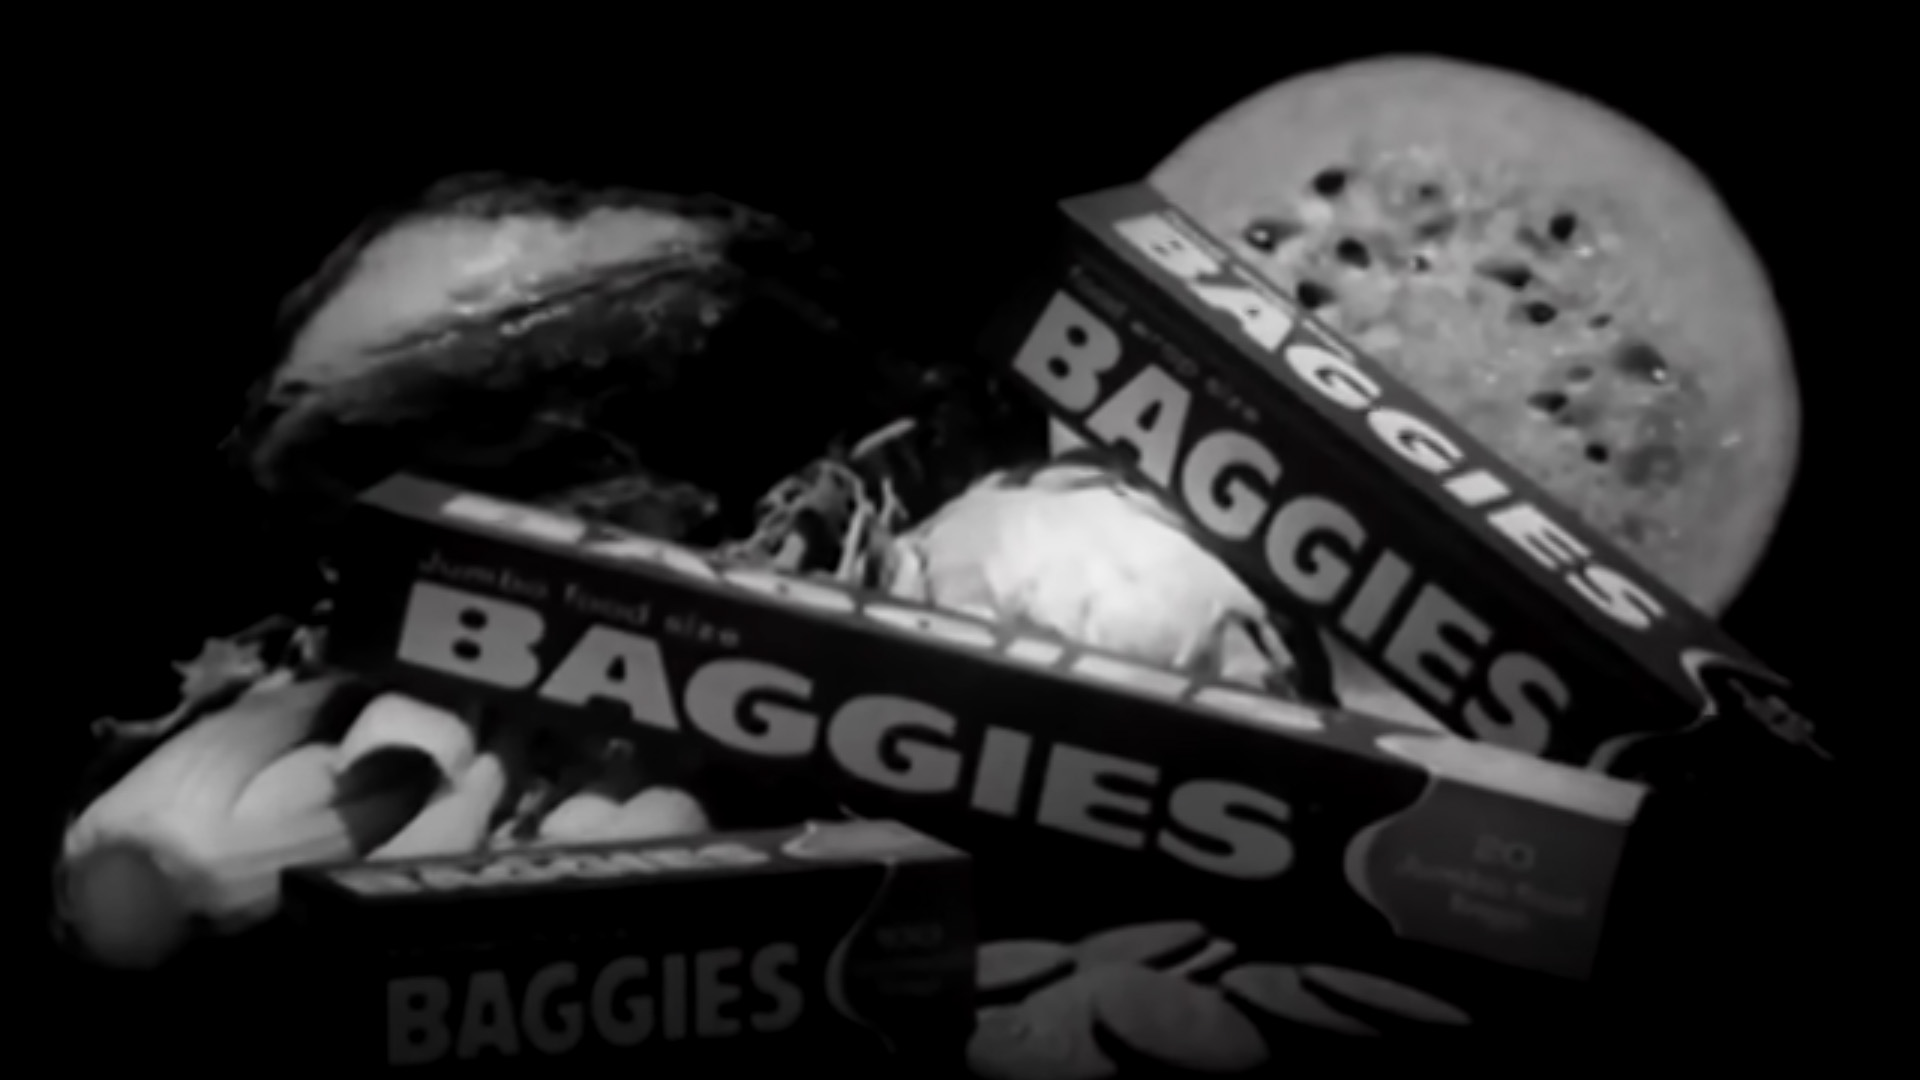 AdWatch: BAGGIES  Keep Food Tasting As Fresh As It Sounds